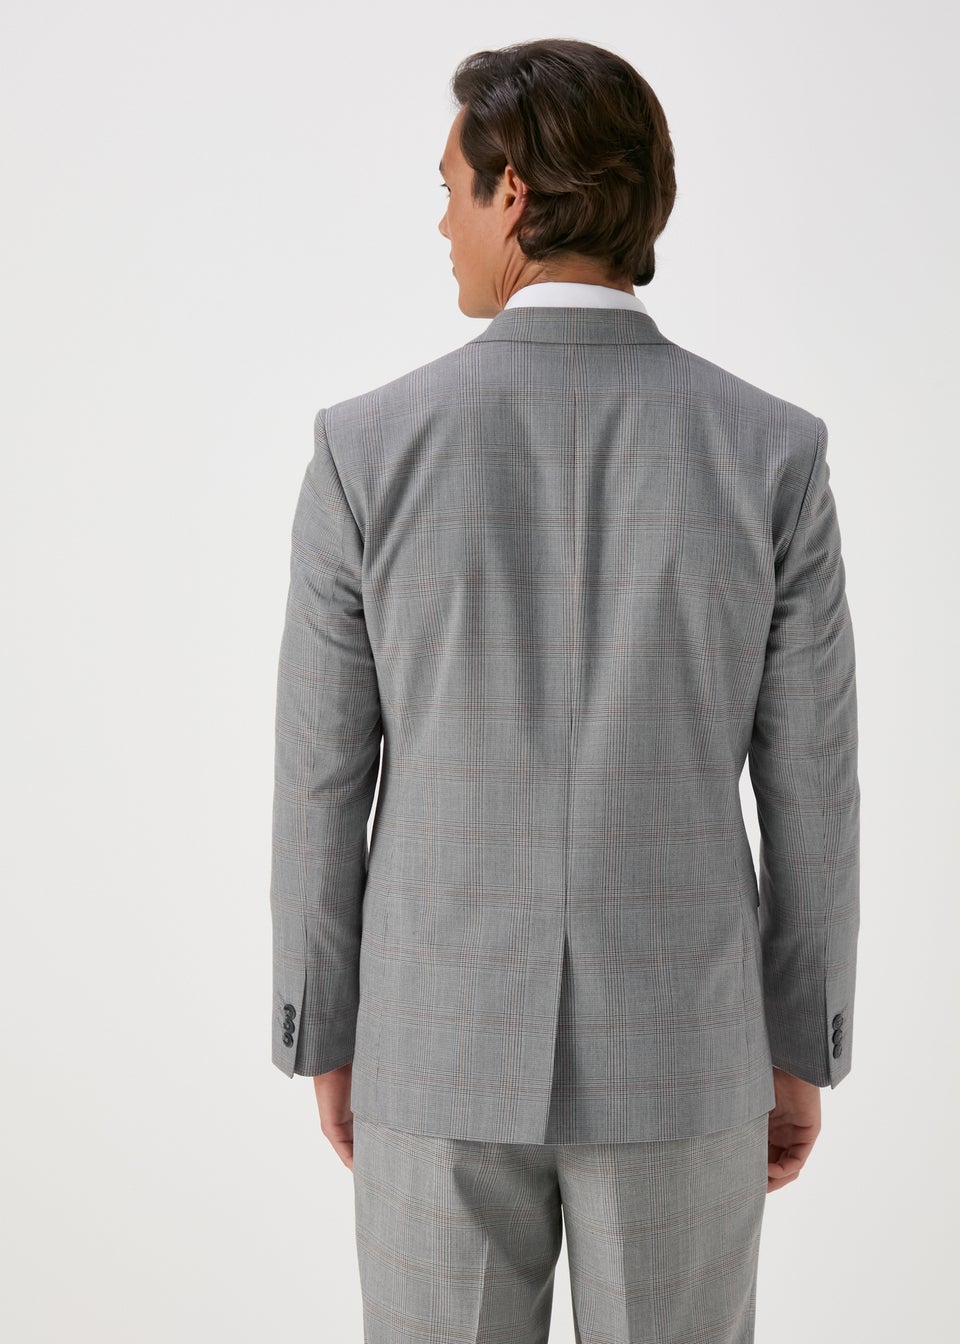 Taylor & Wright Grey Nelson Tailored Fit Jacket